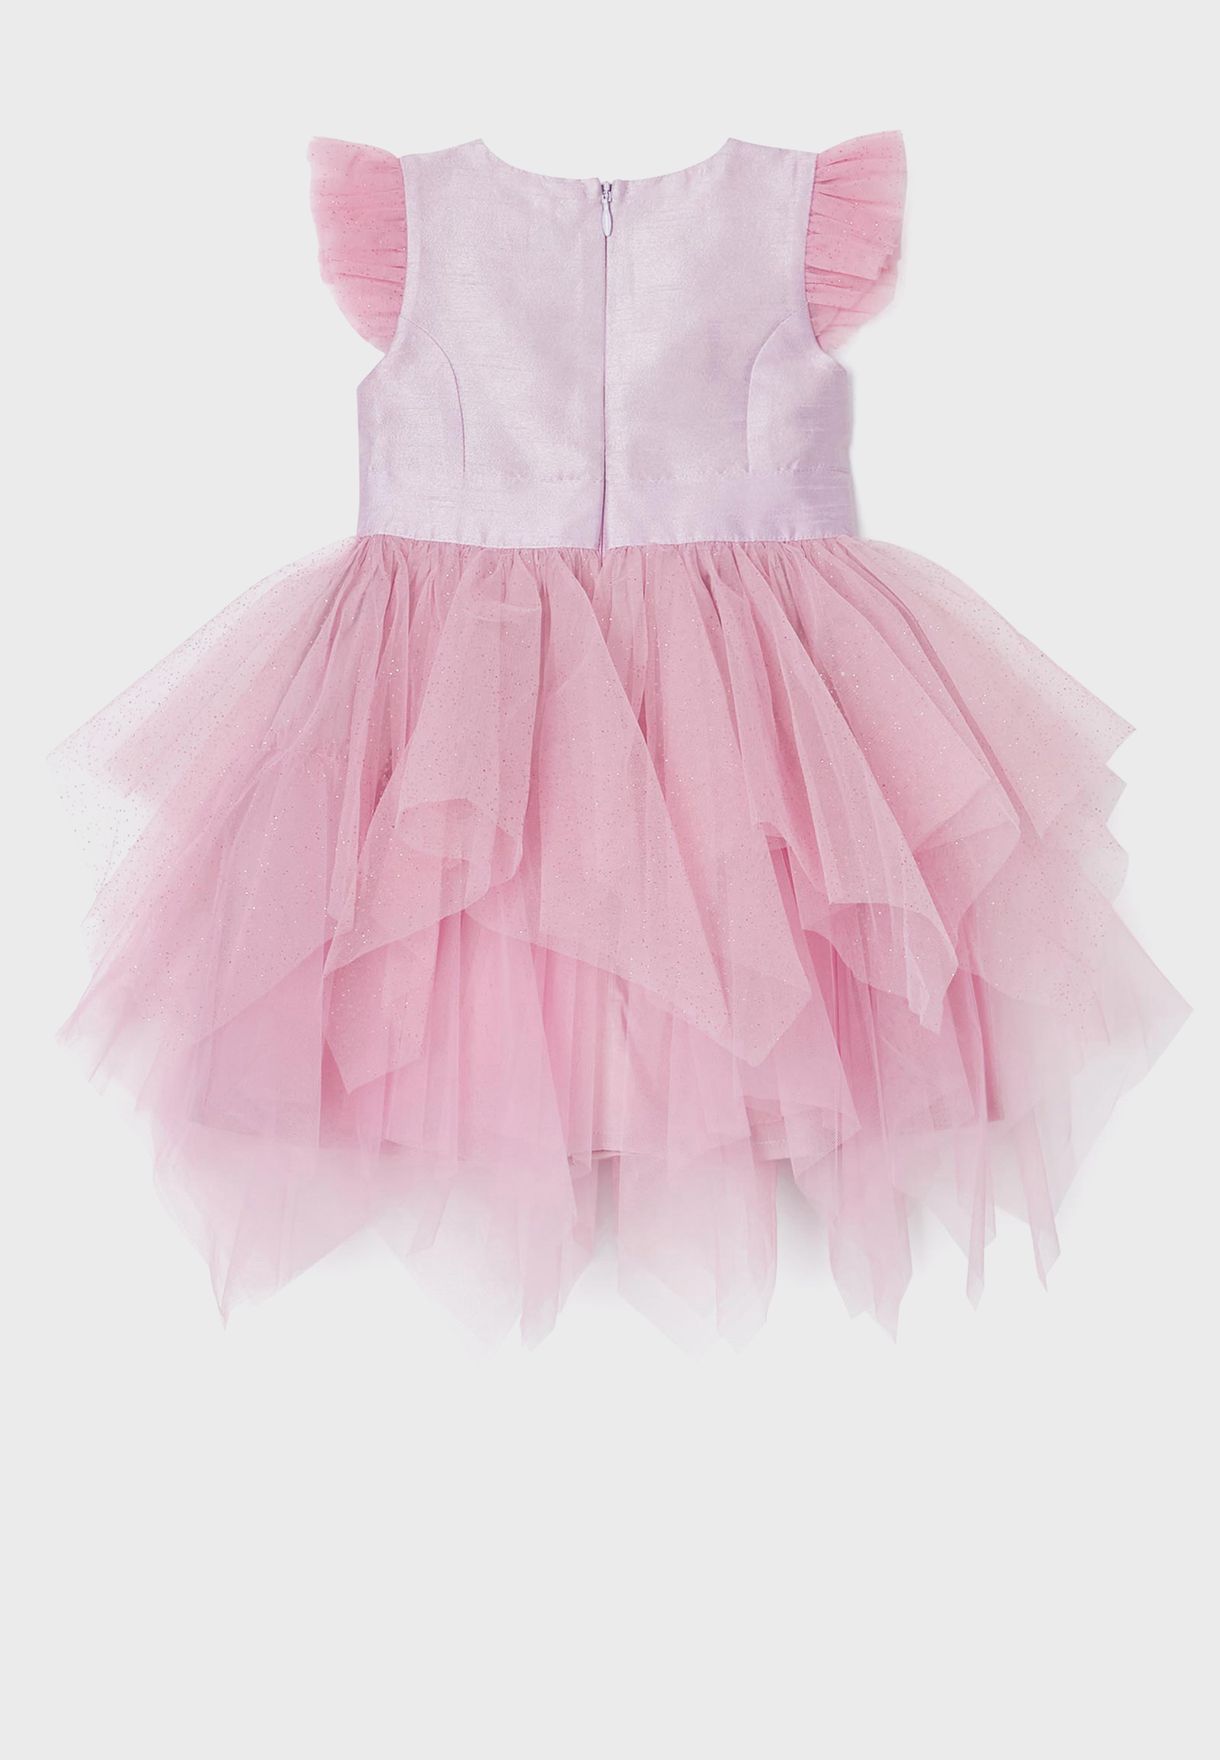 Infant Dress With Bow Detailing On Waist